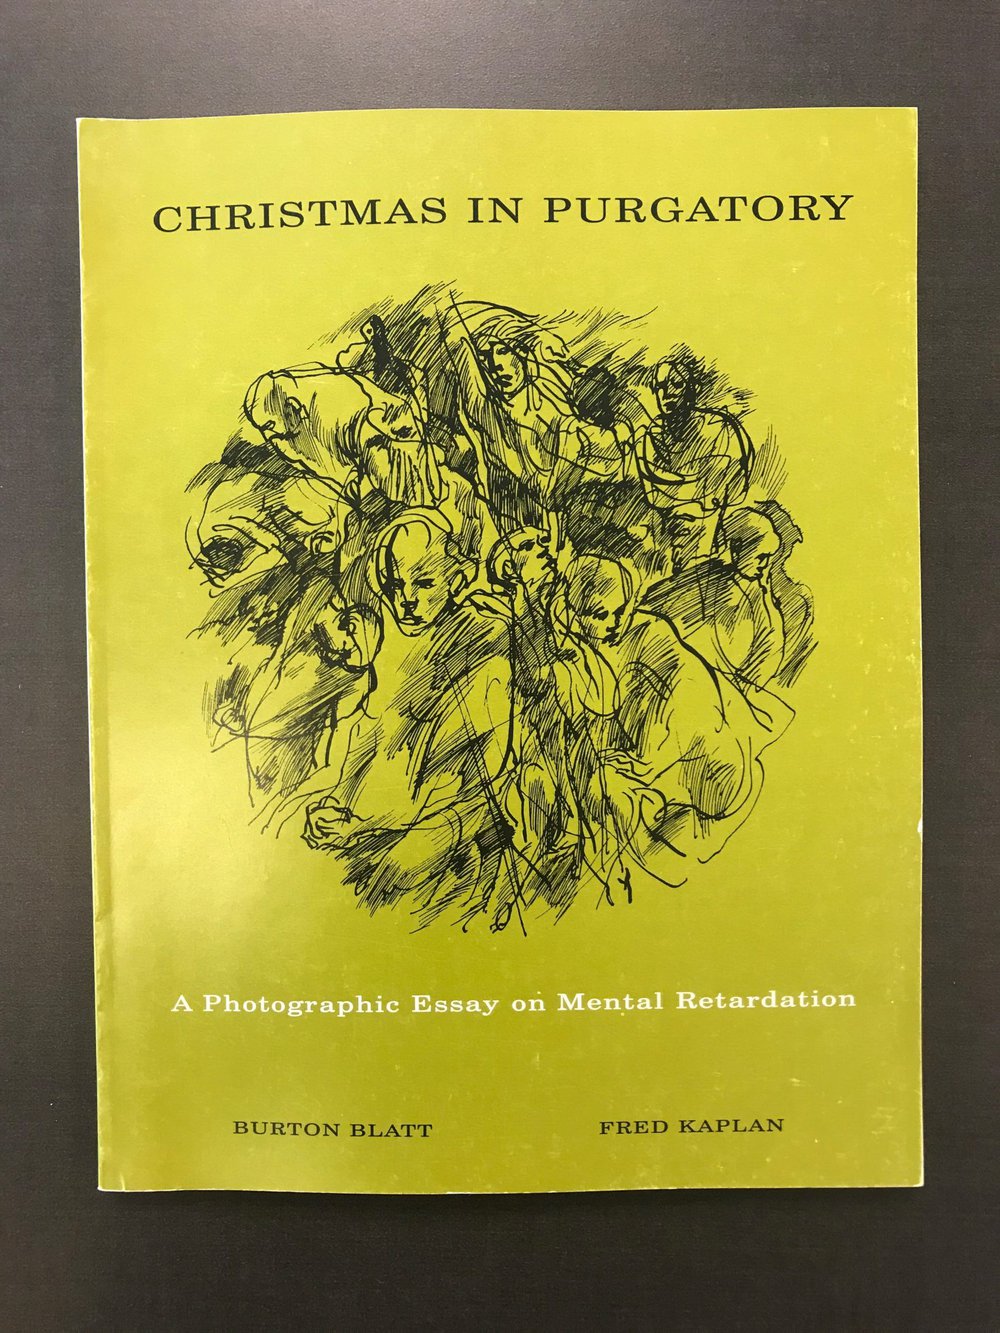 The cover of Christmas in Purgatory: A Photographic Essay on Mental Retardation by Burton Blatt, published in 1966.